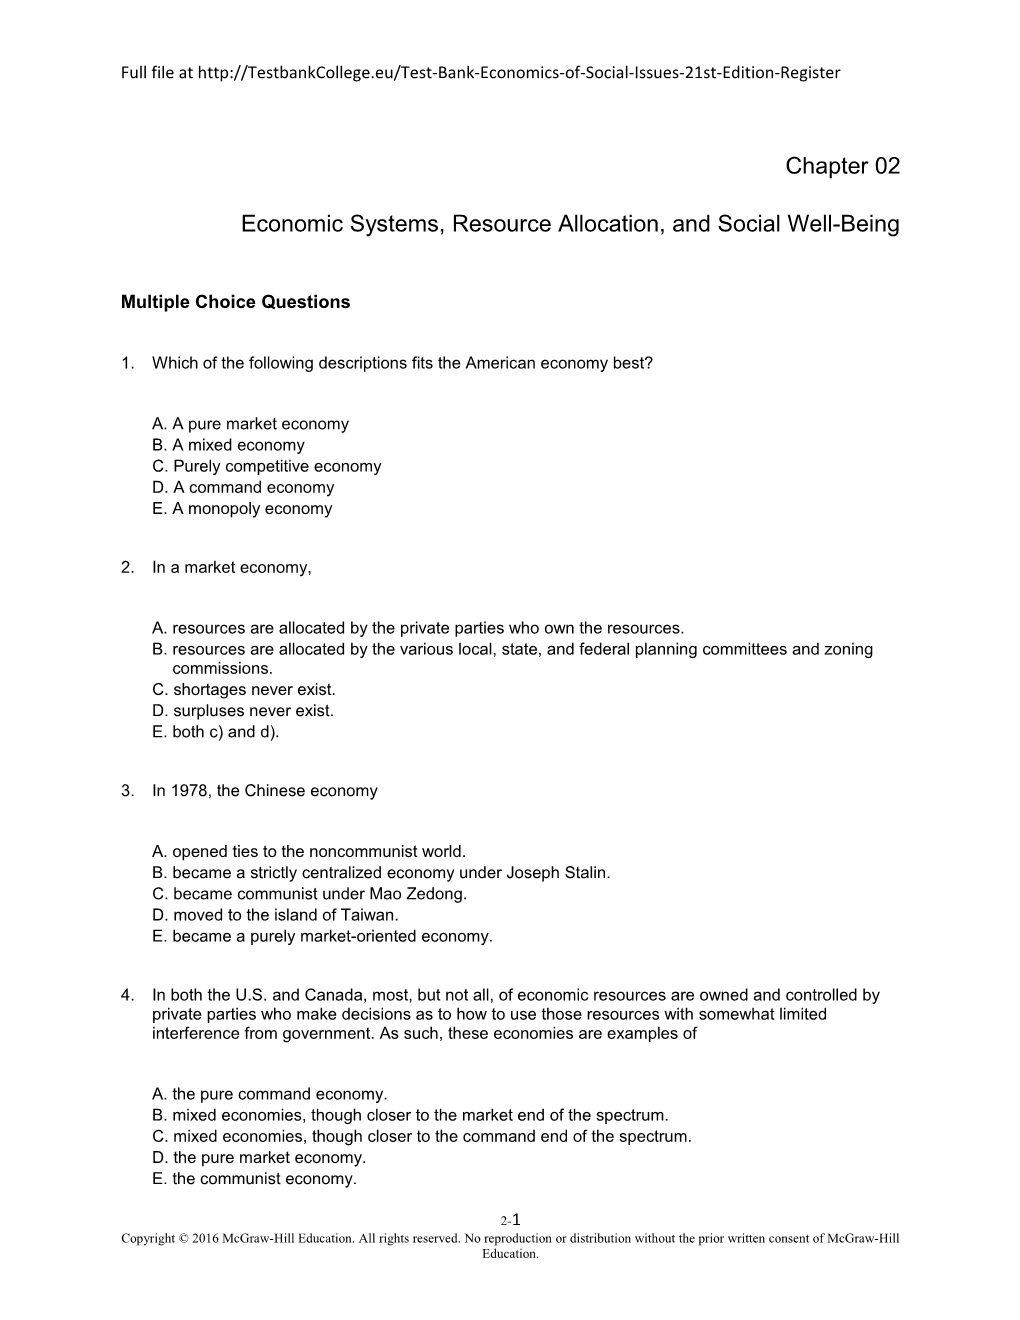 Economic Systems, Resource Allocation, and Social Well-Being